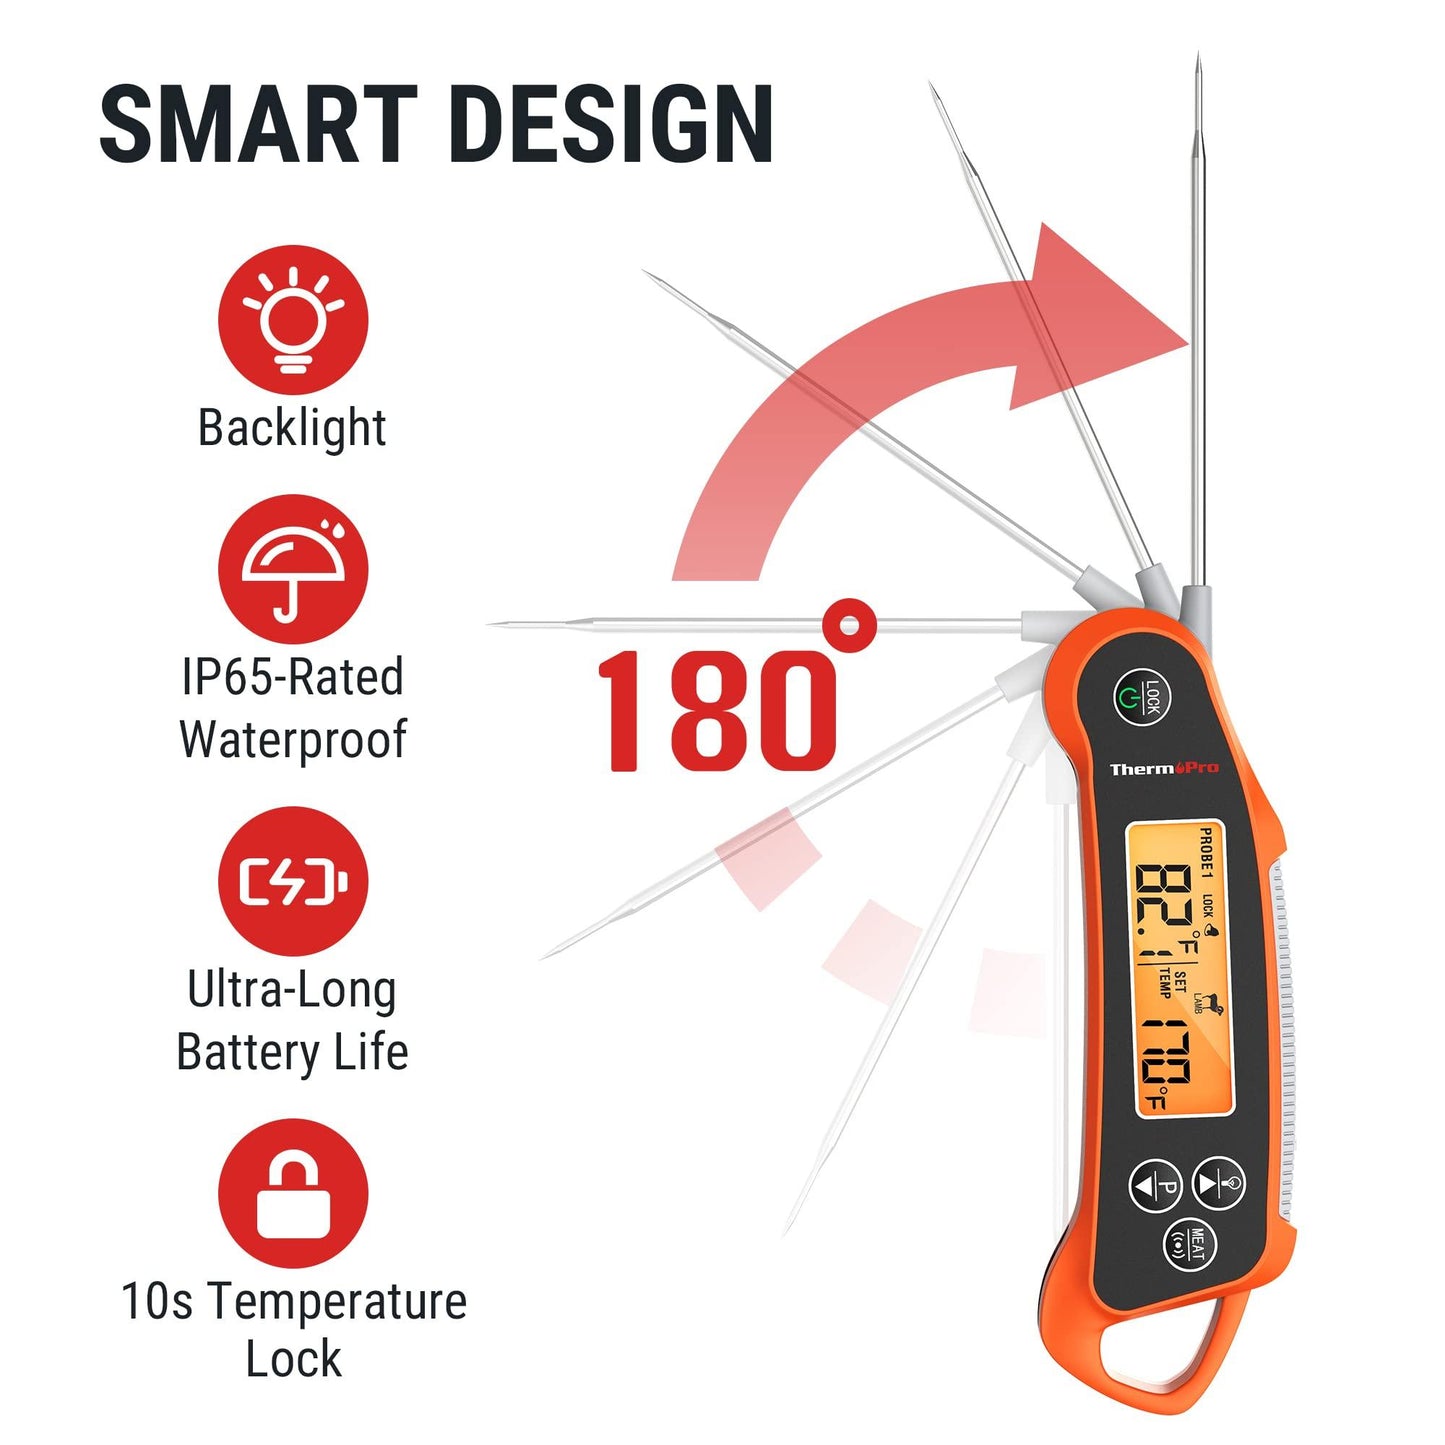 ThermoPro TP710 Instant Read Meat Thermometer Digital for Cooking, 2-in-1 Waterproof Kitchen Food Thermometer with Dual Probes and Dual Temperature Display for Oven, Grilling, Smoker & BBQ - CookCave